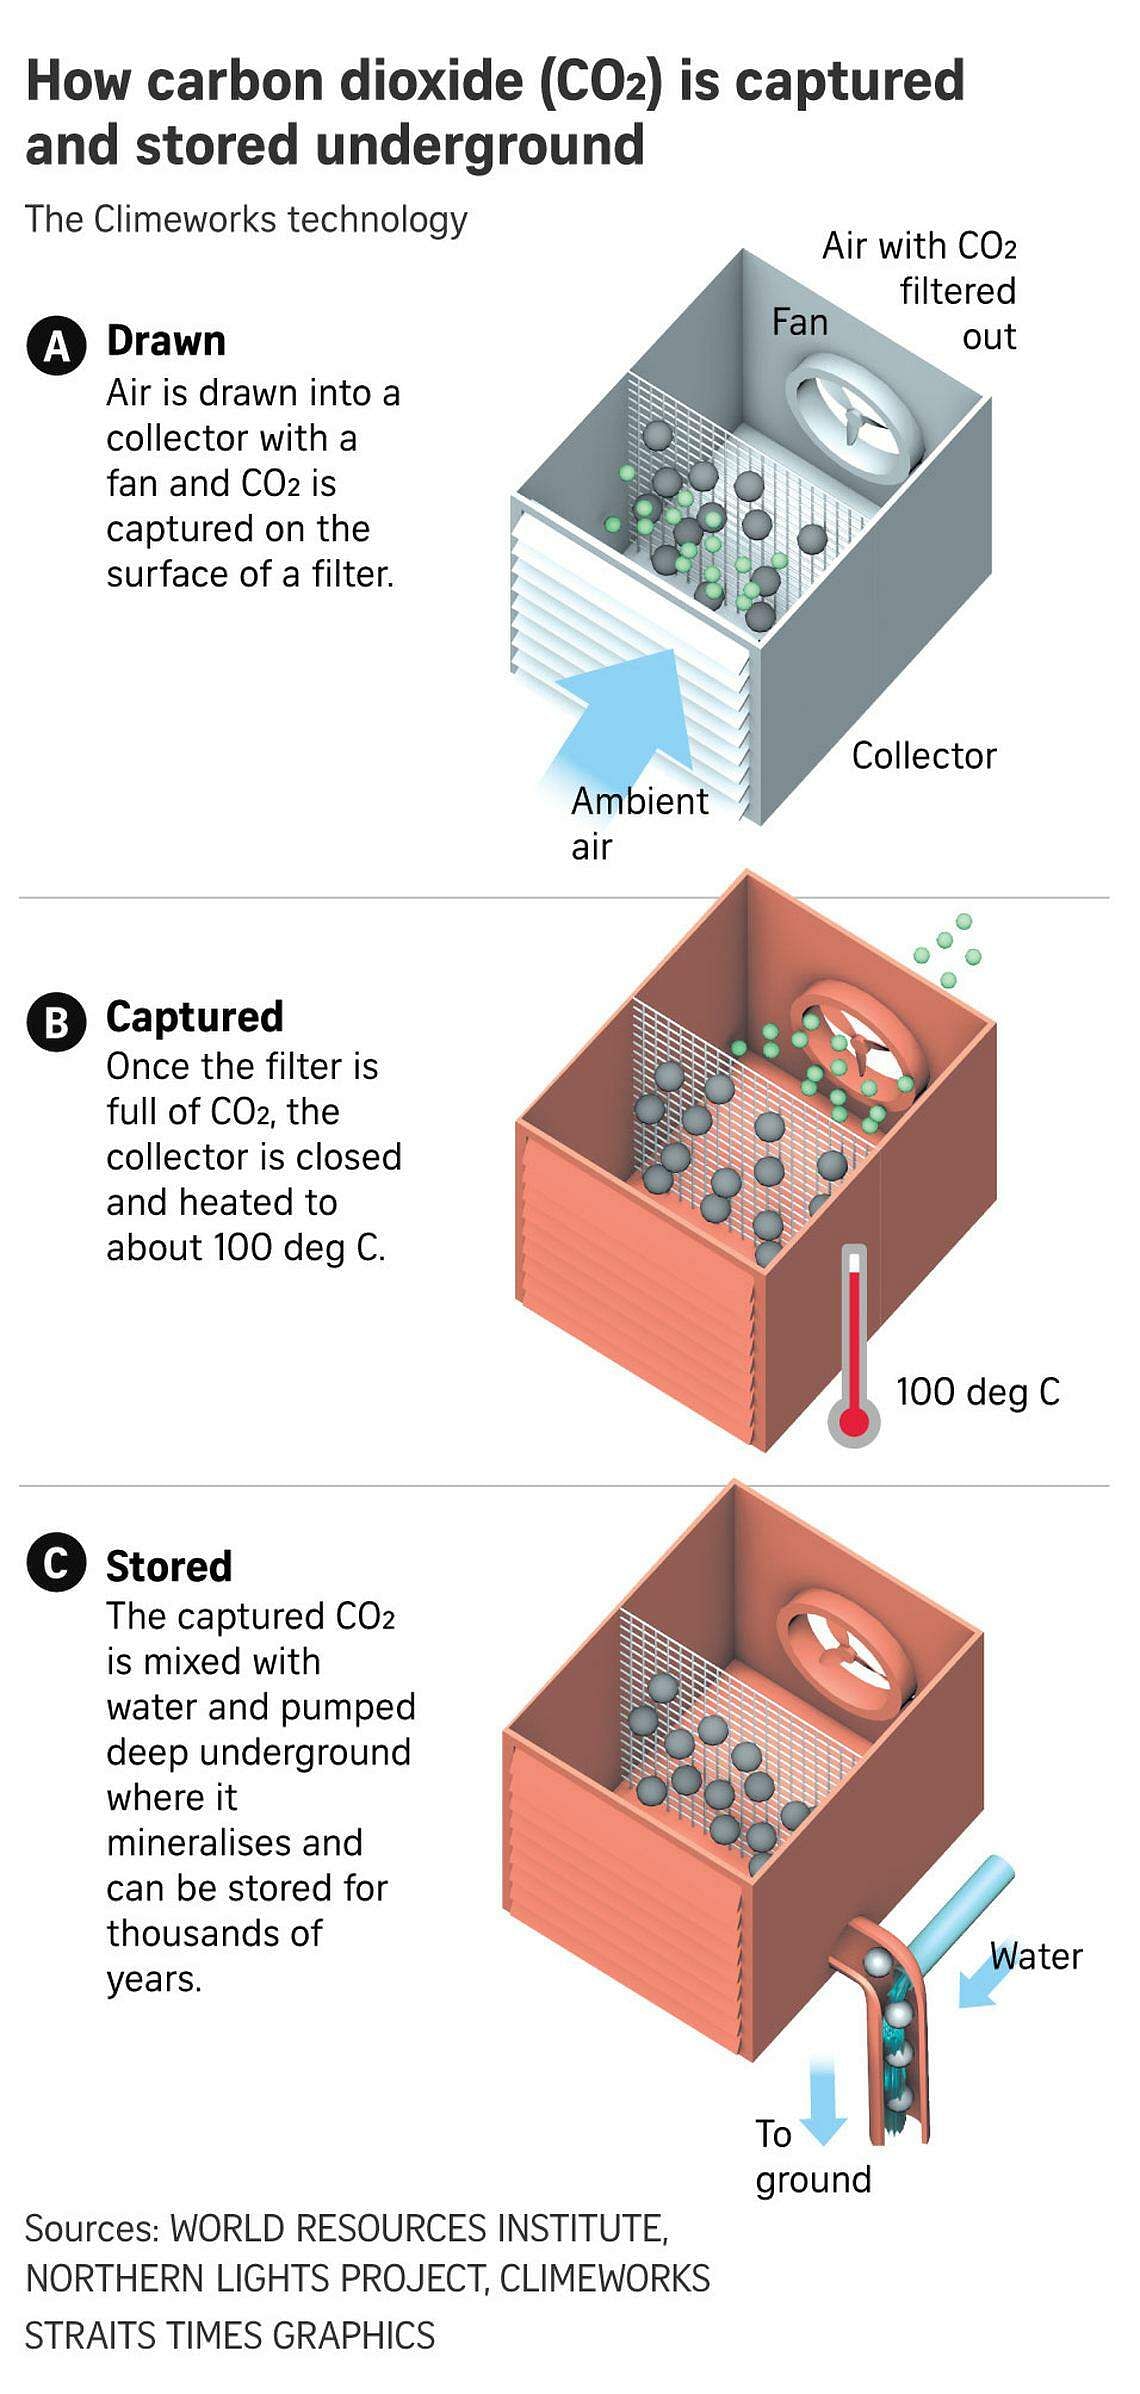 Mining carbon dioxide from the air: The CO2 journey